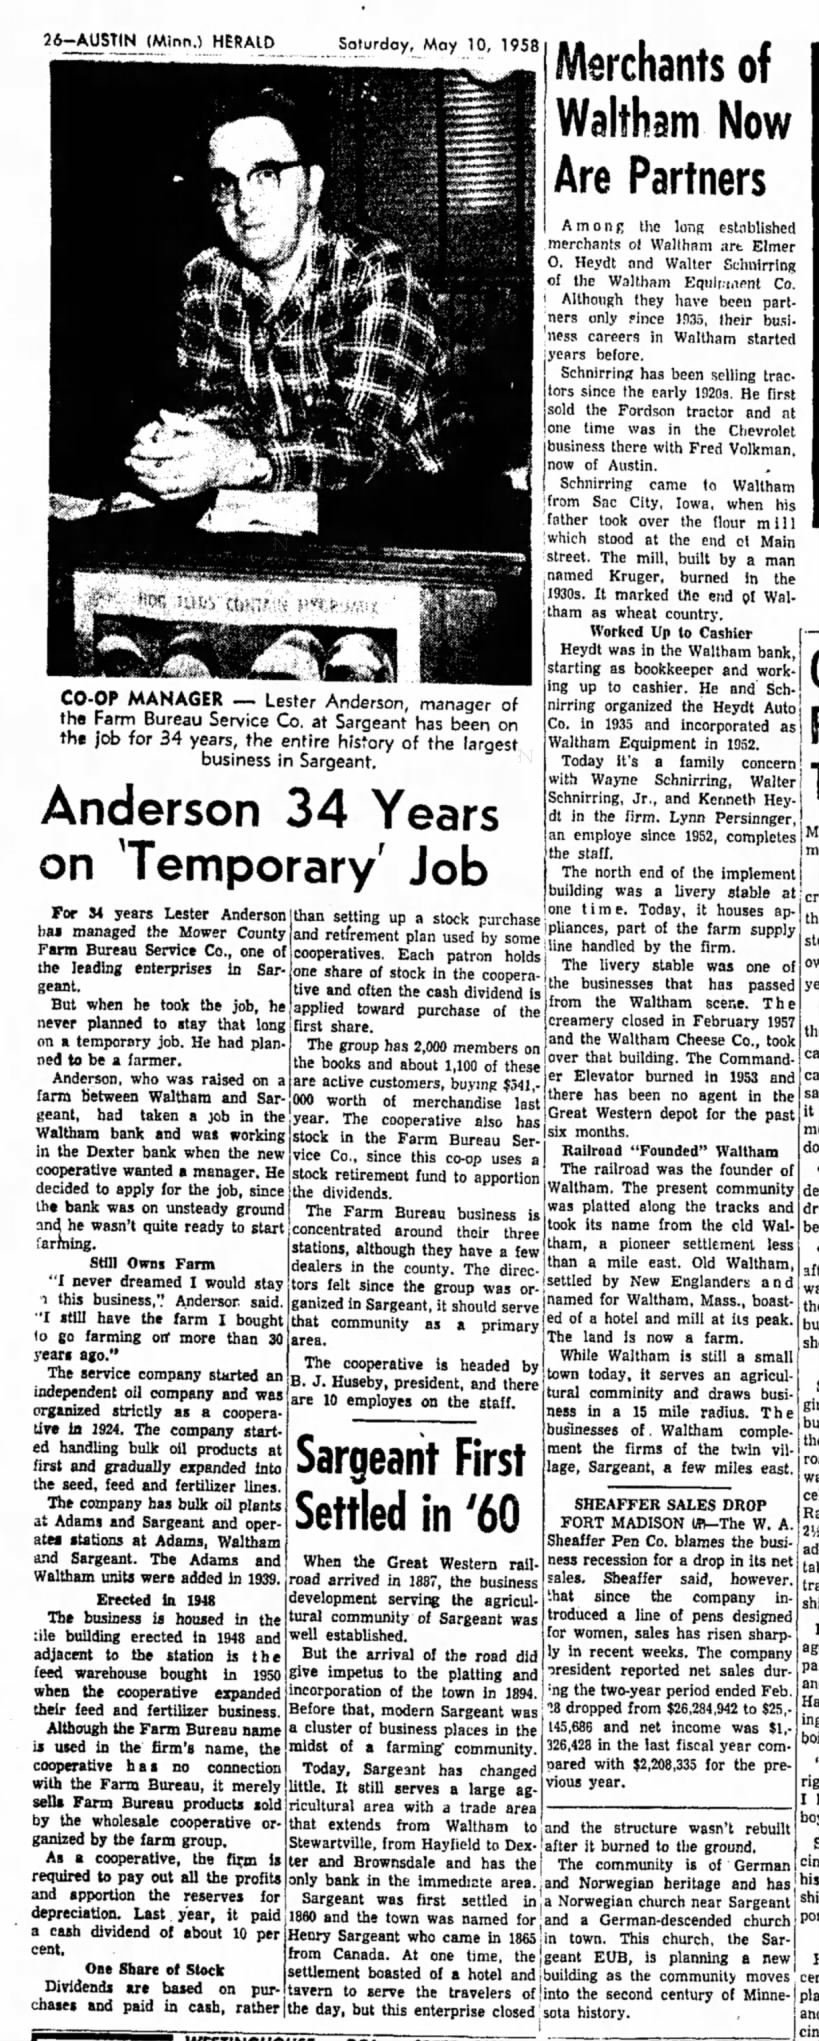 History about Sargeant and Waltham, MN businesses- Austin Dally Herald May 10 1958, pg 26